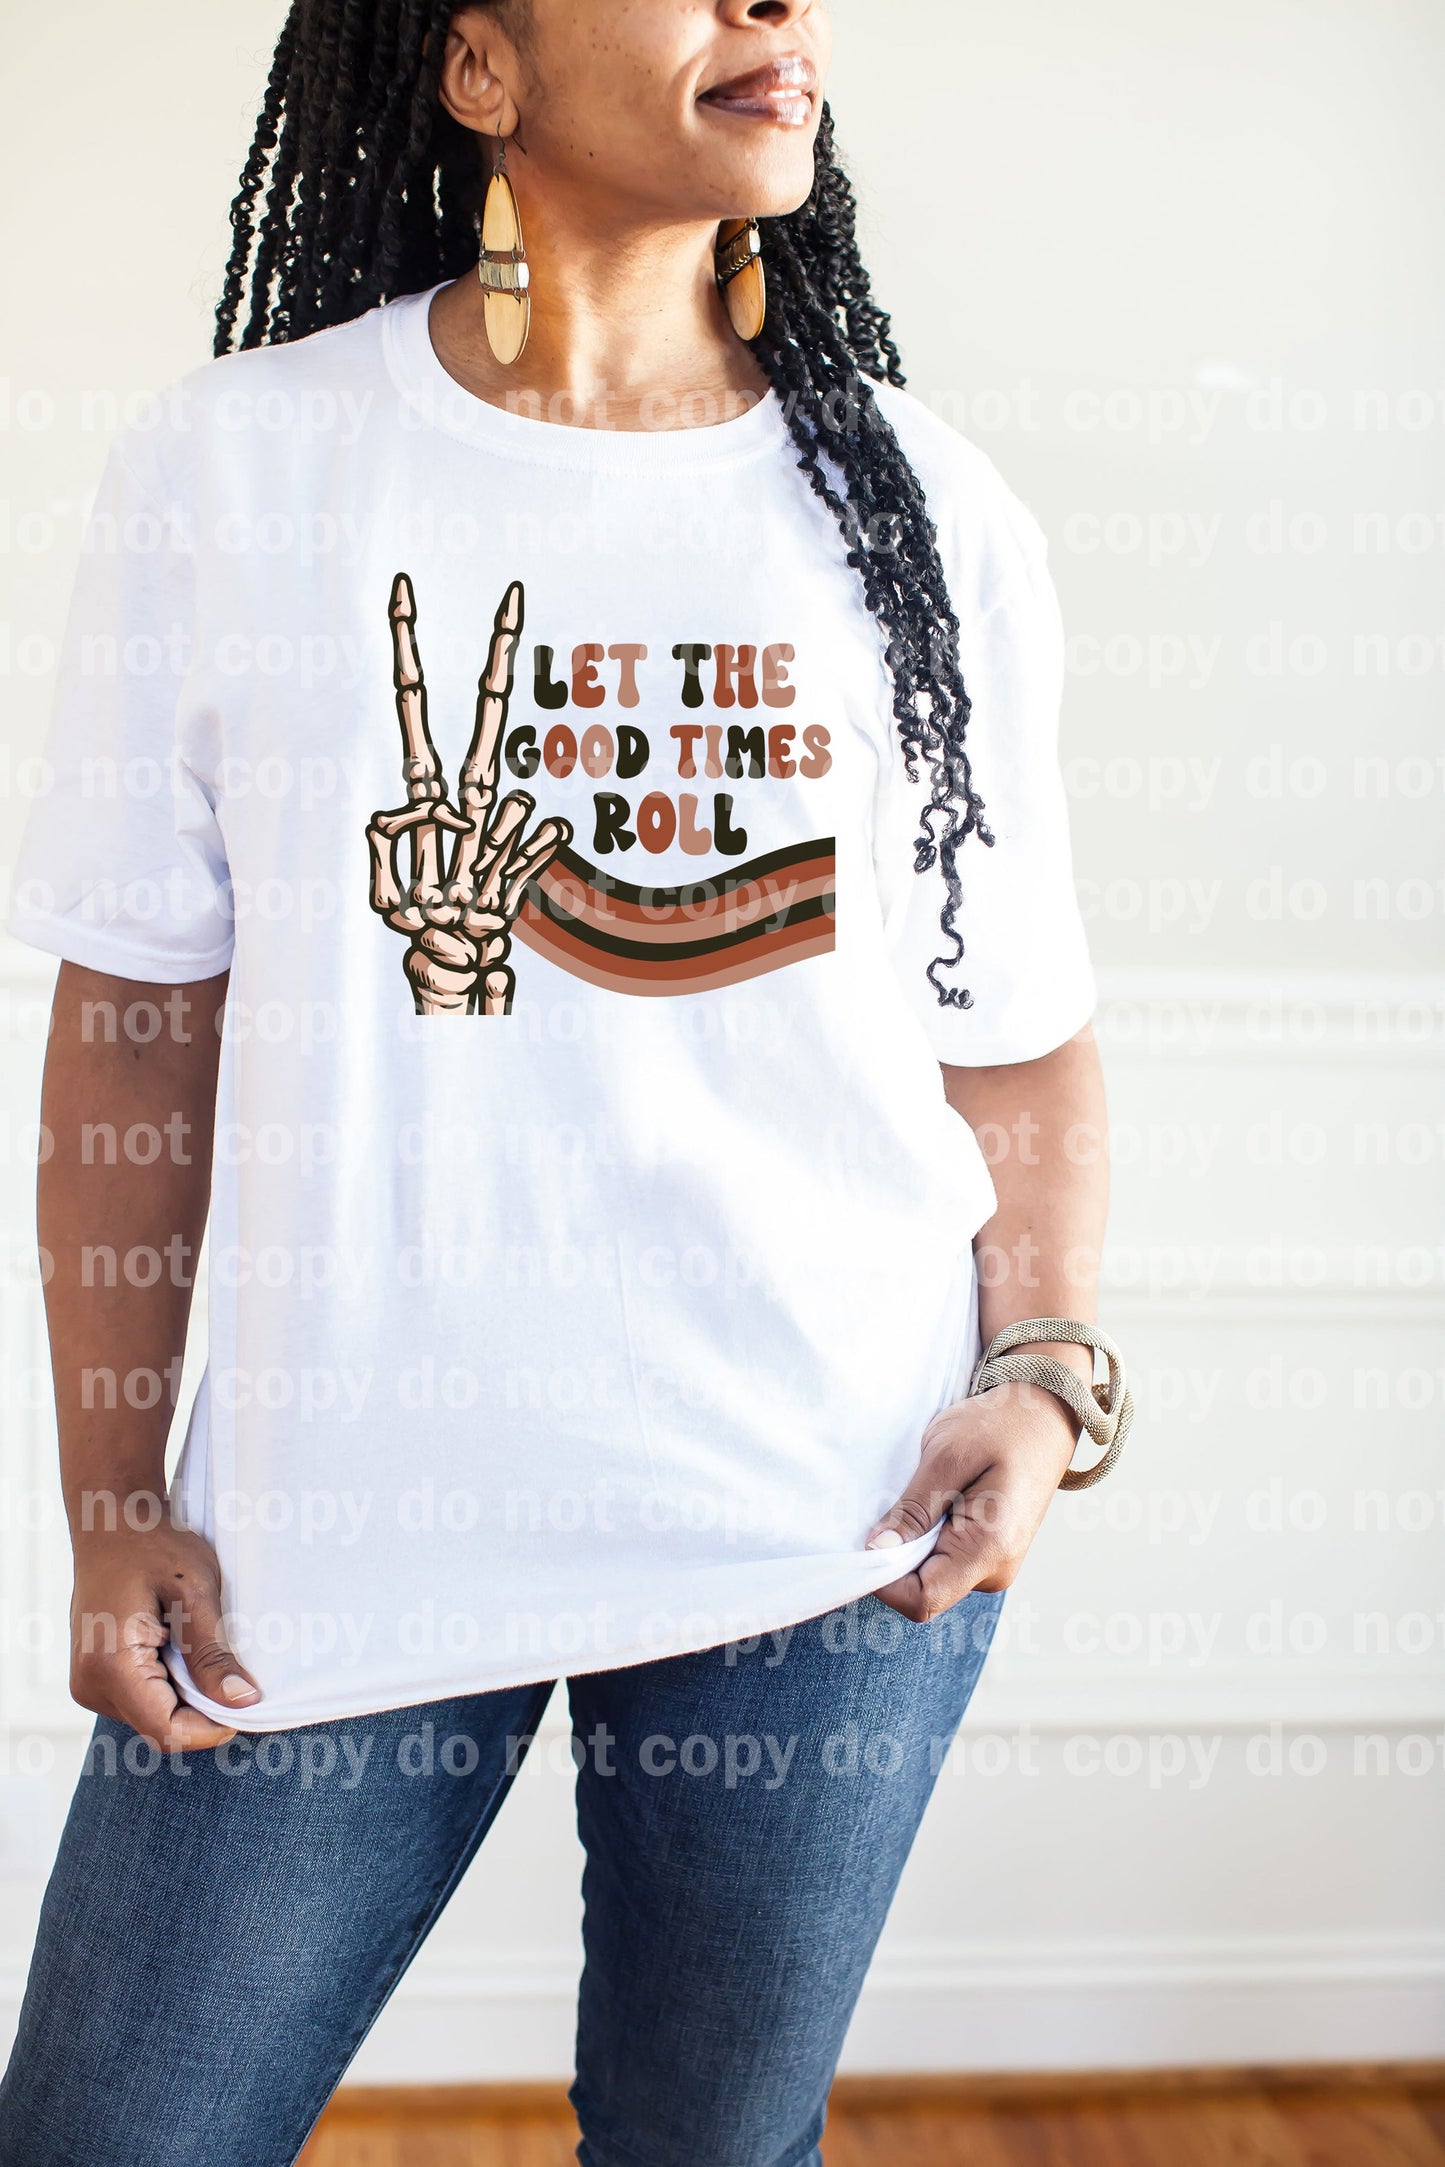 Let The Good Times Roll Dream Print or Sublimation Print